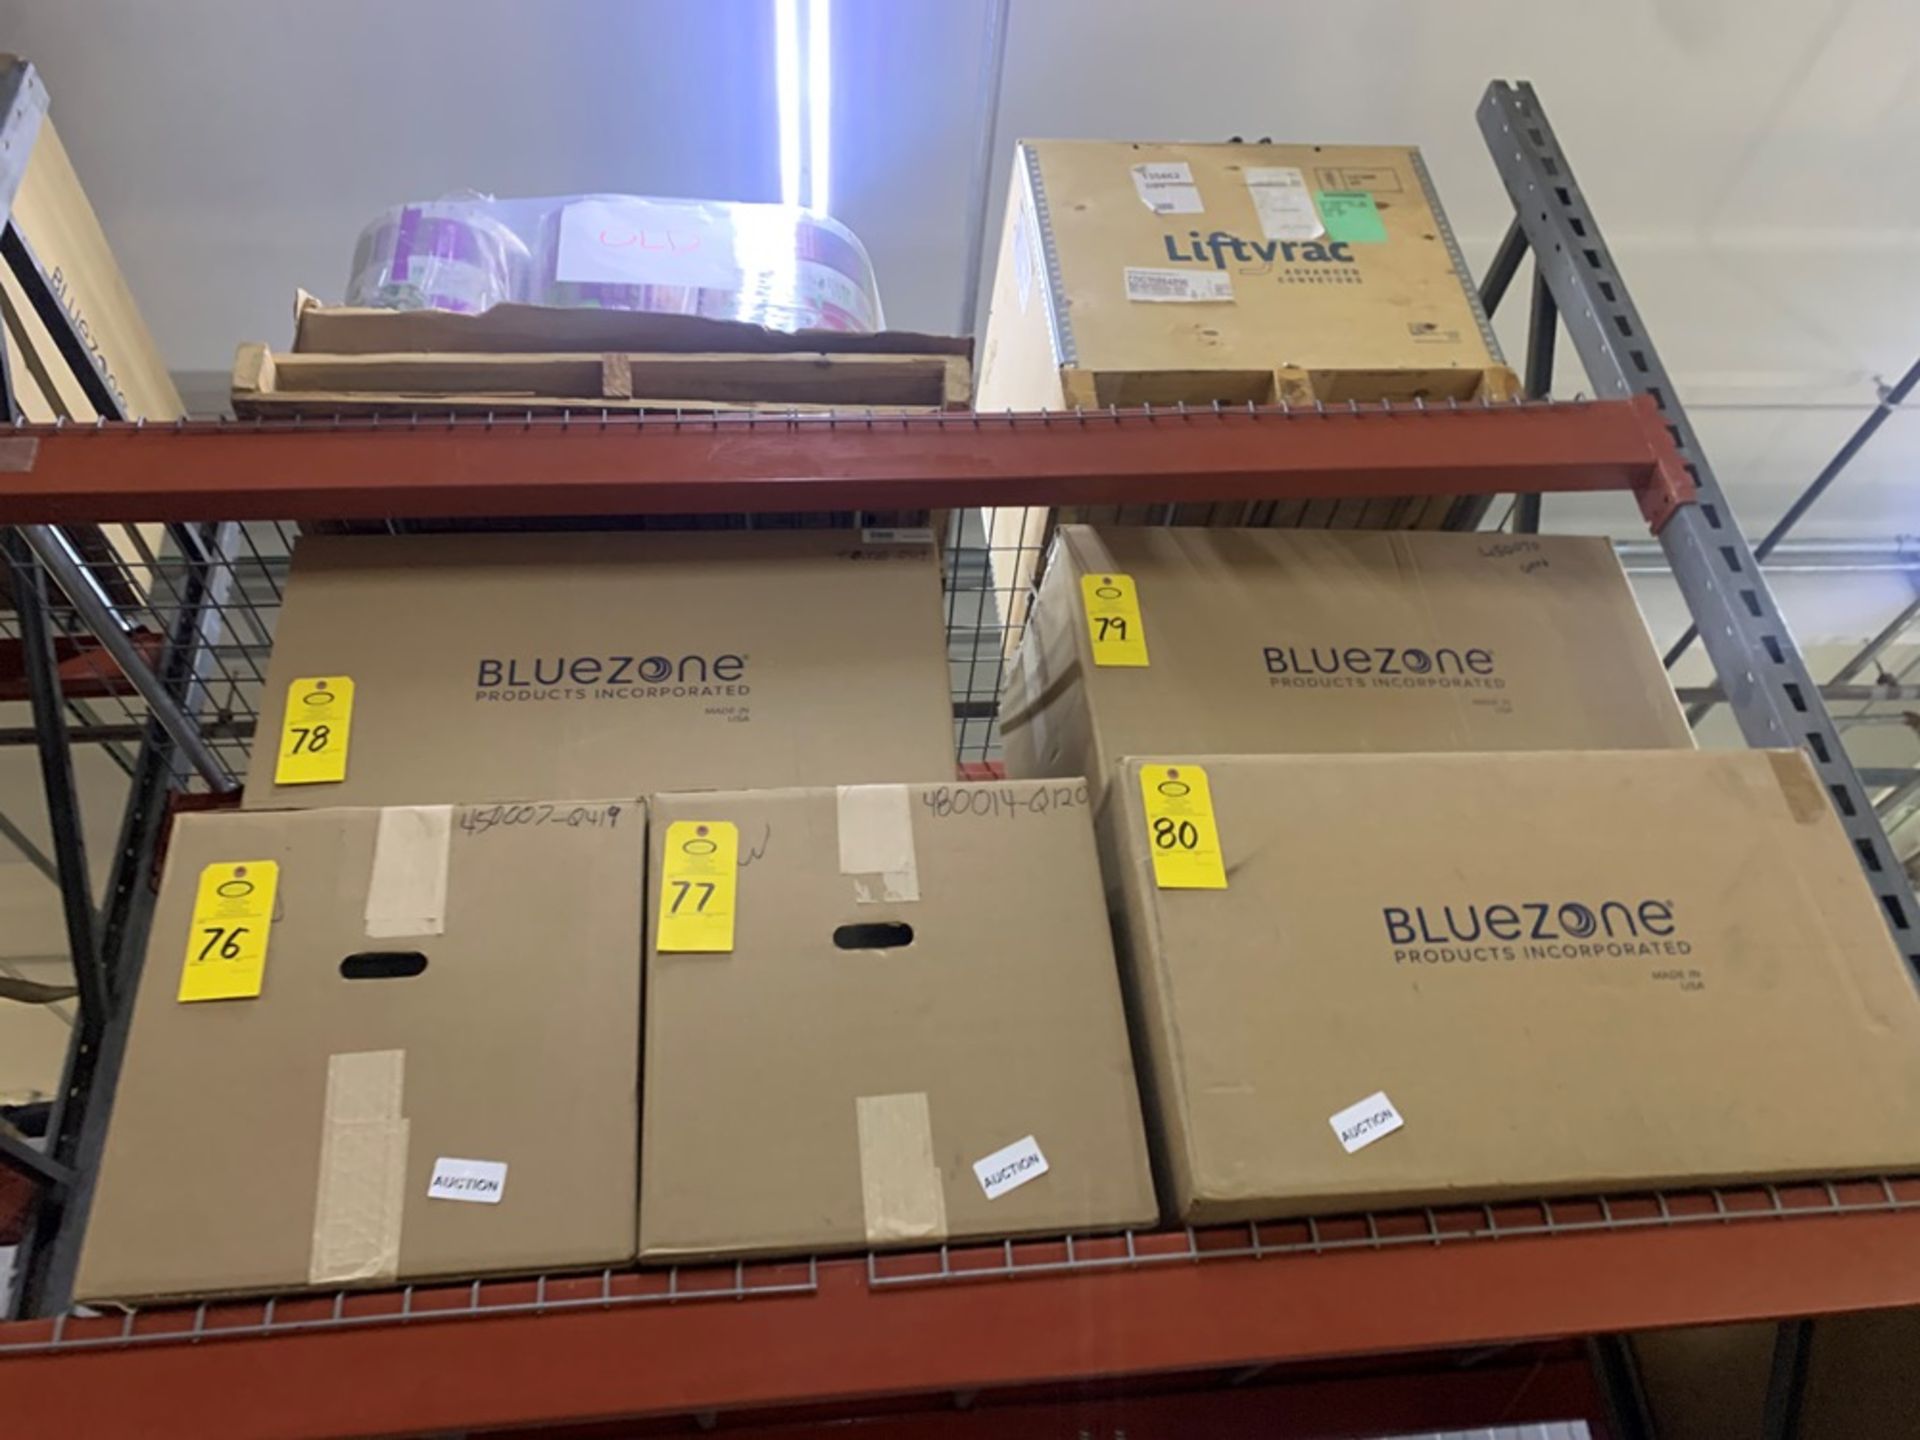 Bluezone Mdl. 420 Air Purifier, new or refurbished by Bluezone, 120 volts, in original shipping box - Image 8 of 8